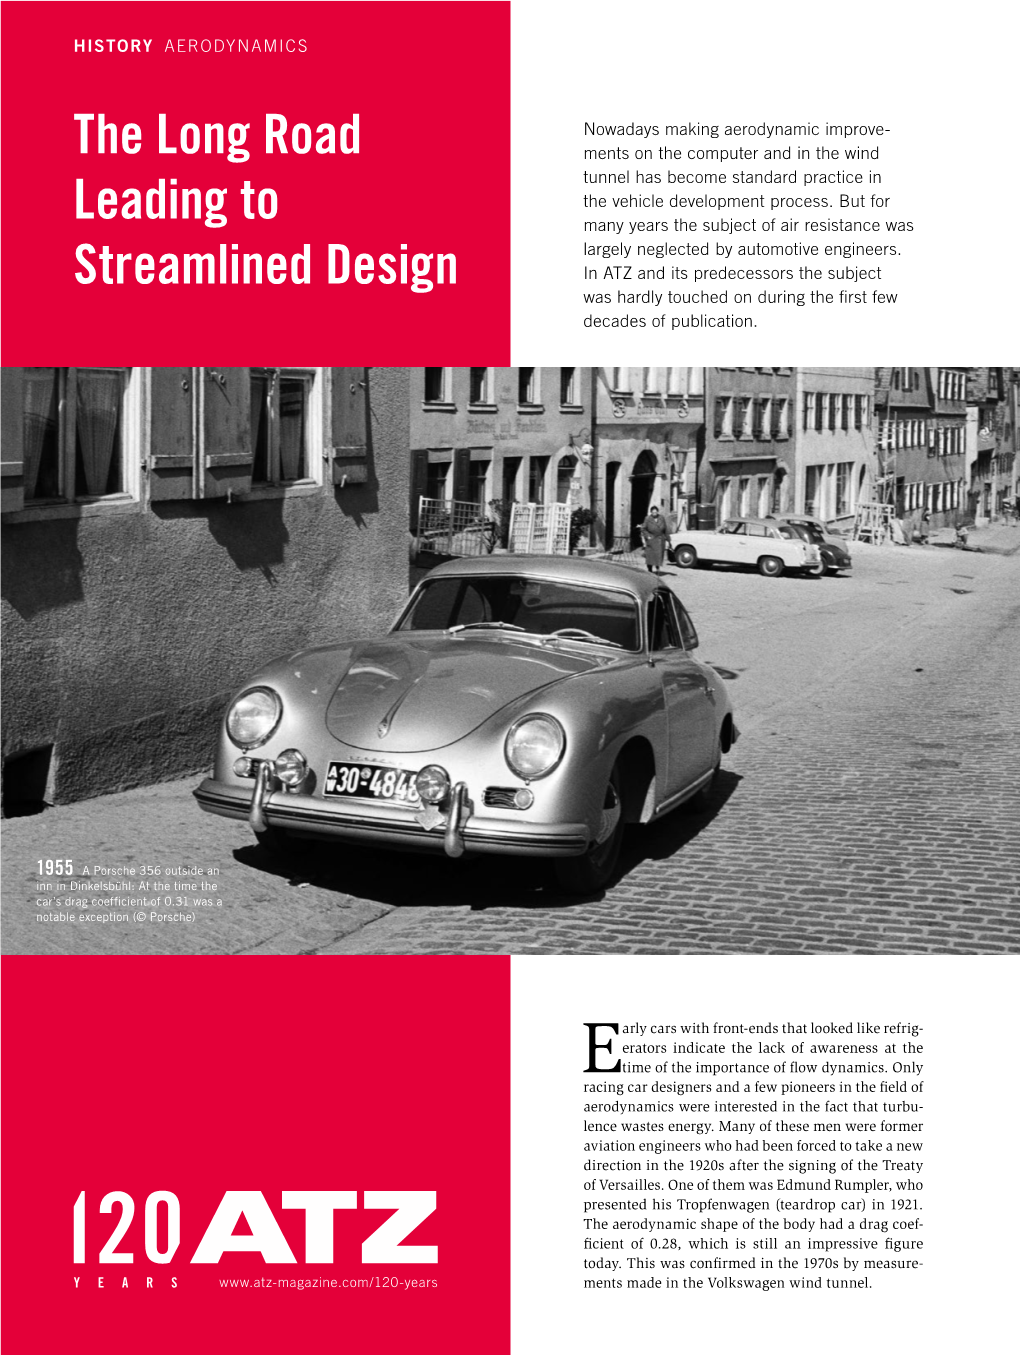 The Long Road Leading to Streamlined Design